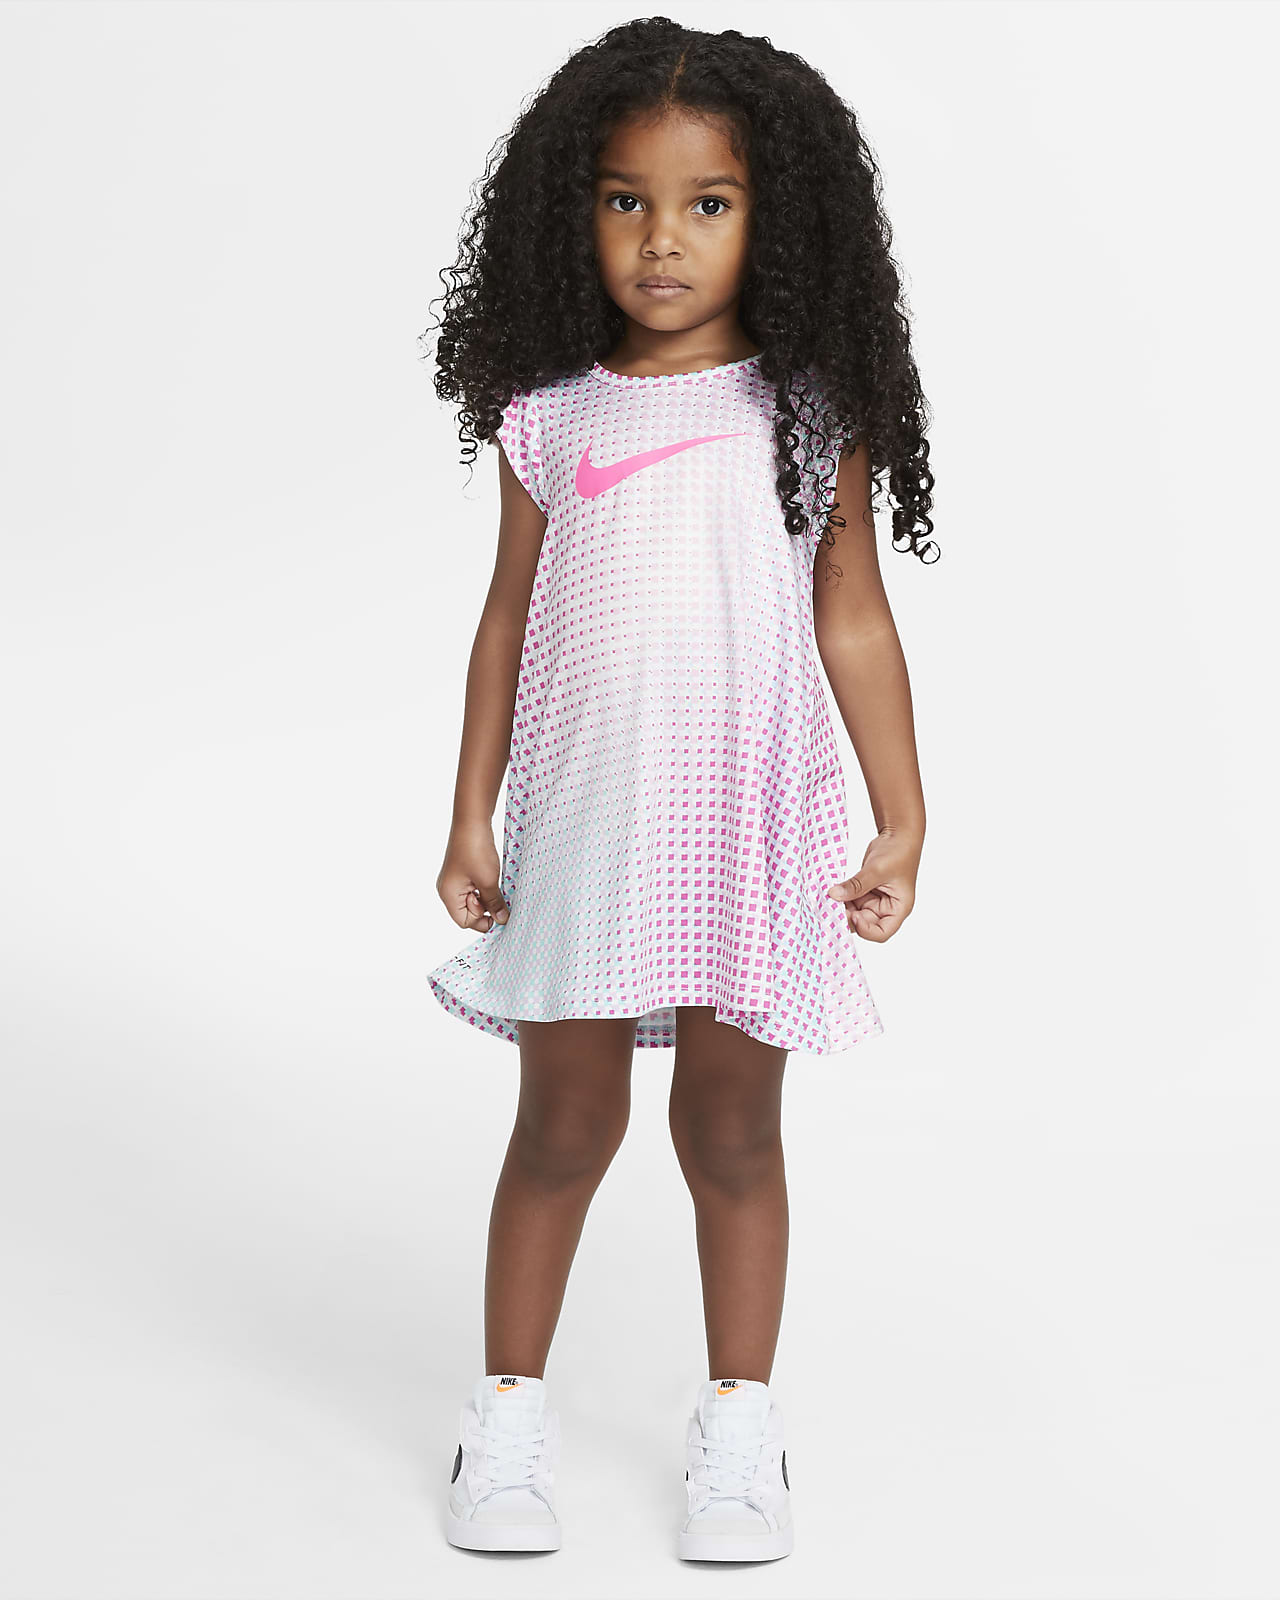 nike outfit toddler girl